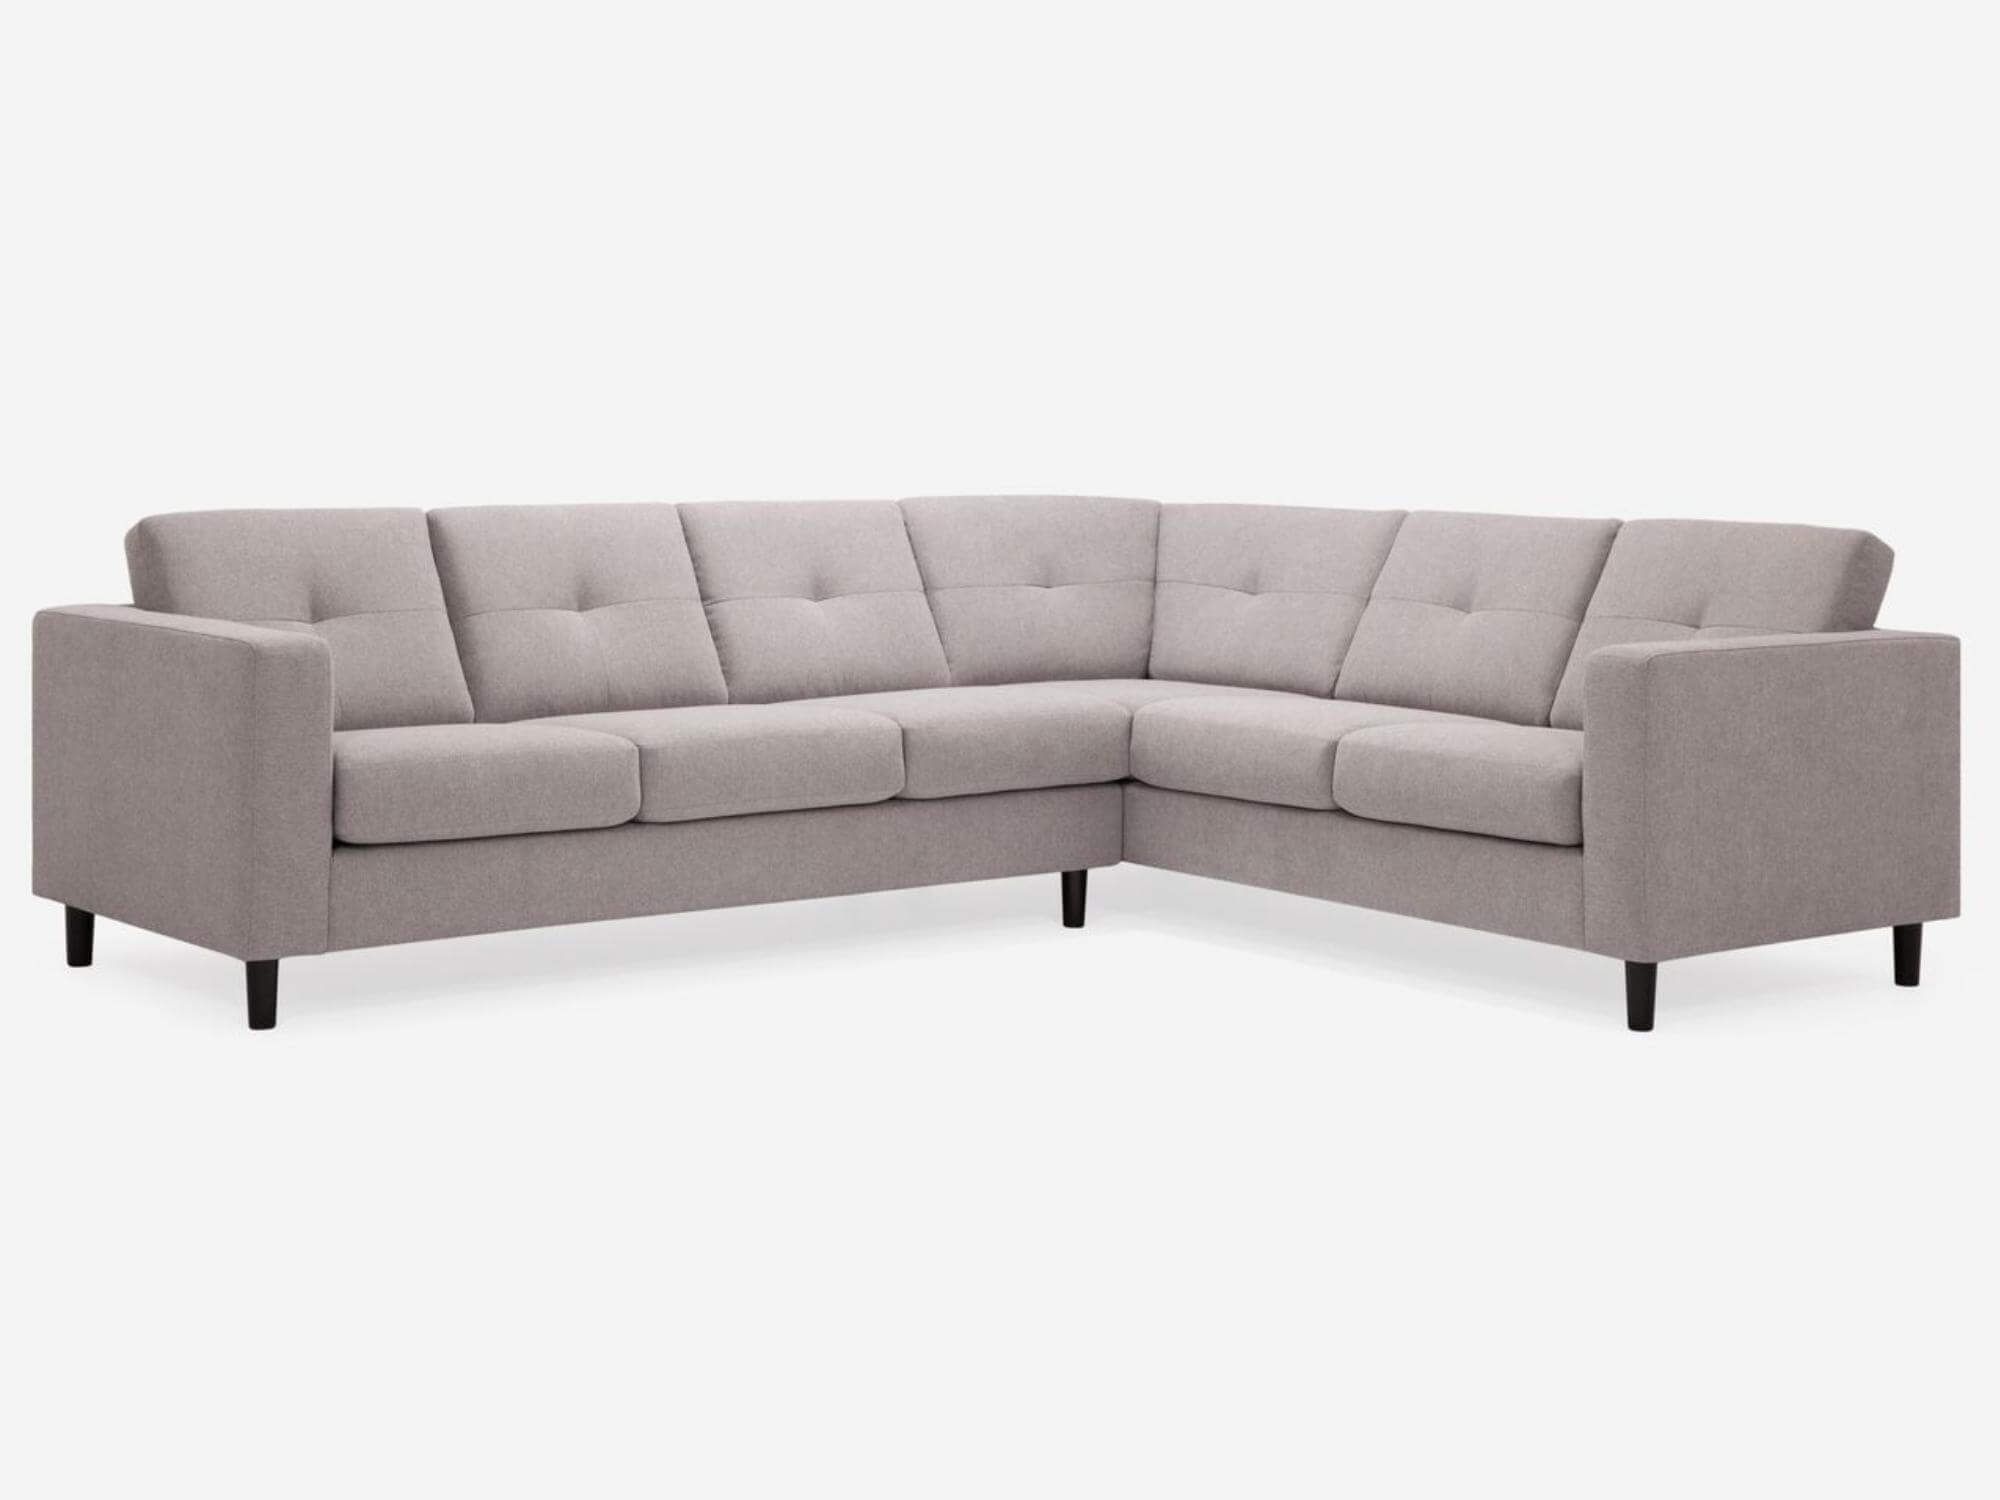 Eq3 Solo 6 Seat Sectional Sofa | Living Room Furniture Online Inside 6 Seater Sectional Couches (Photo 10 of 15)